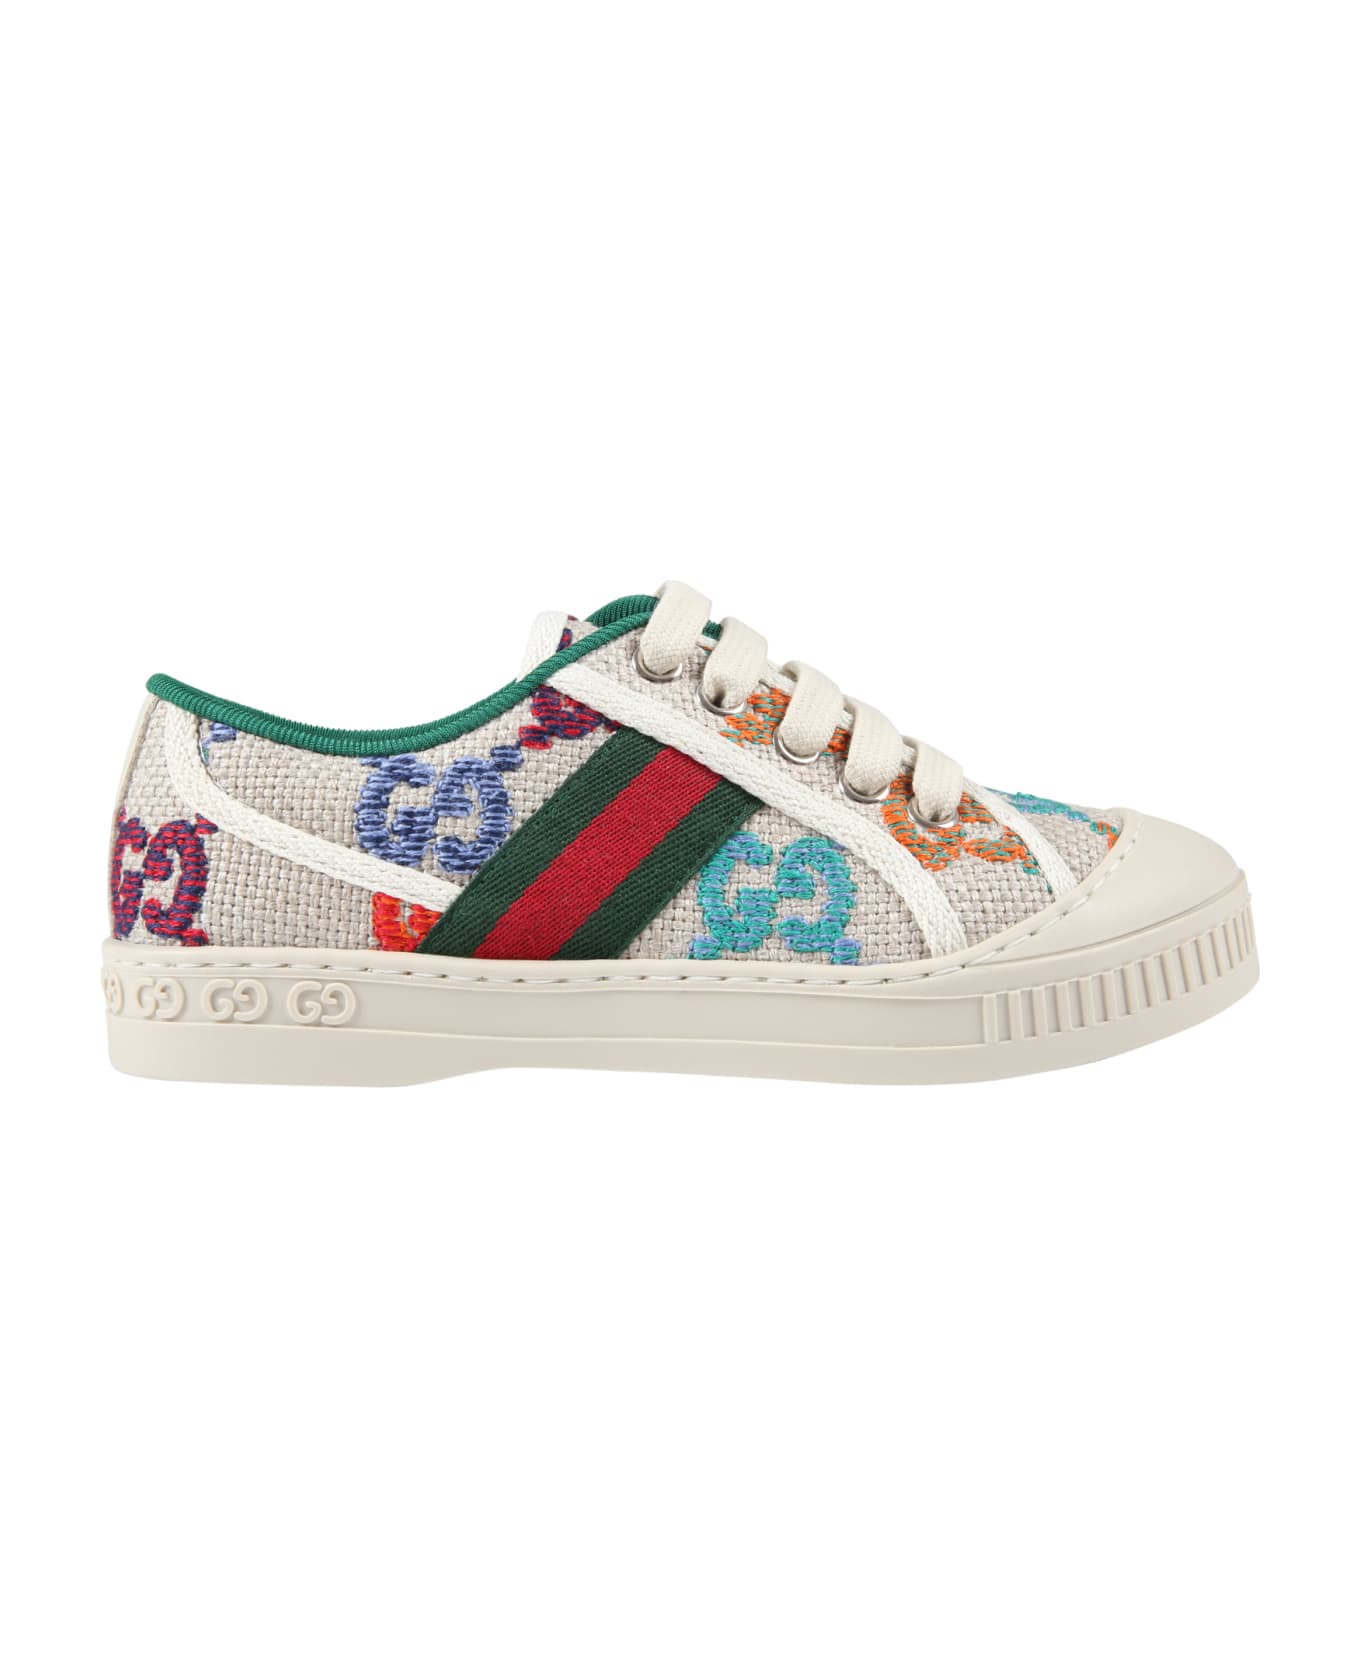 Gucci Beige Sneakers For Kids - Multicolor